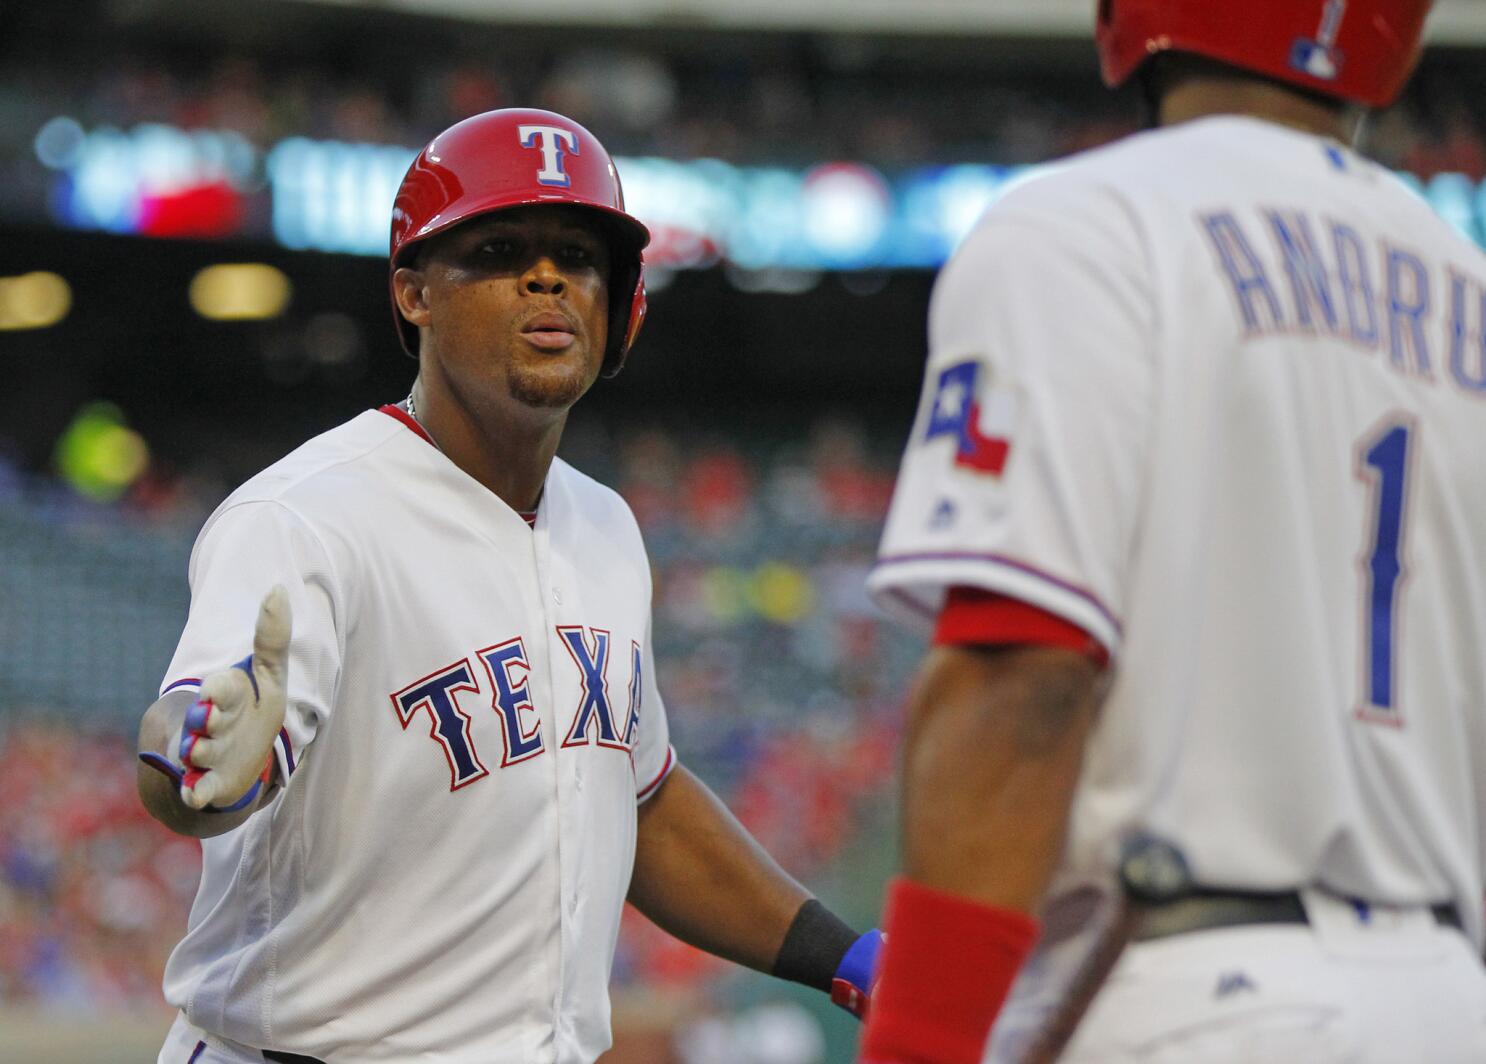 Adrian Beltre moves even closer to 3,000 hits in Rangers' win over